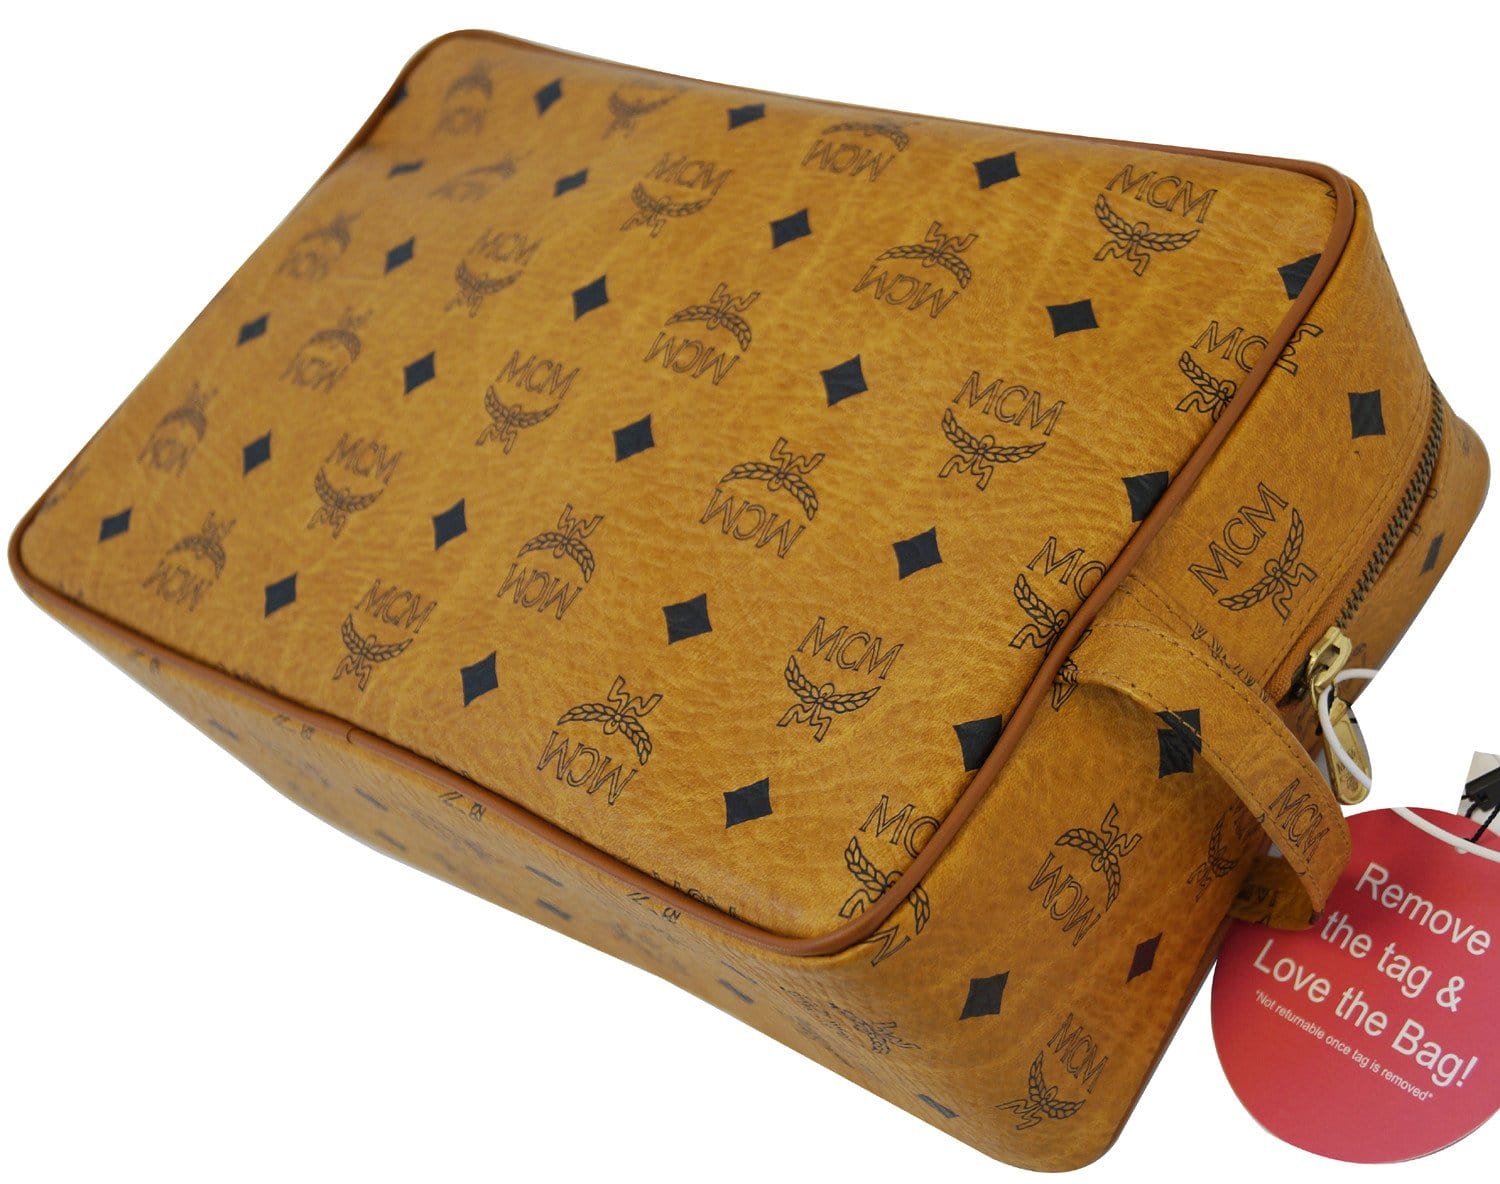 Mcm Authenticated Clutch Bag